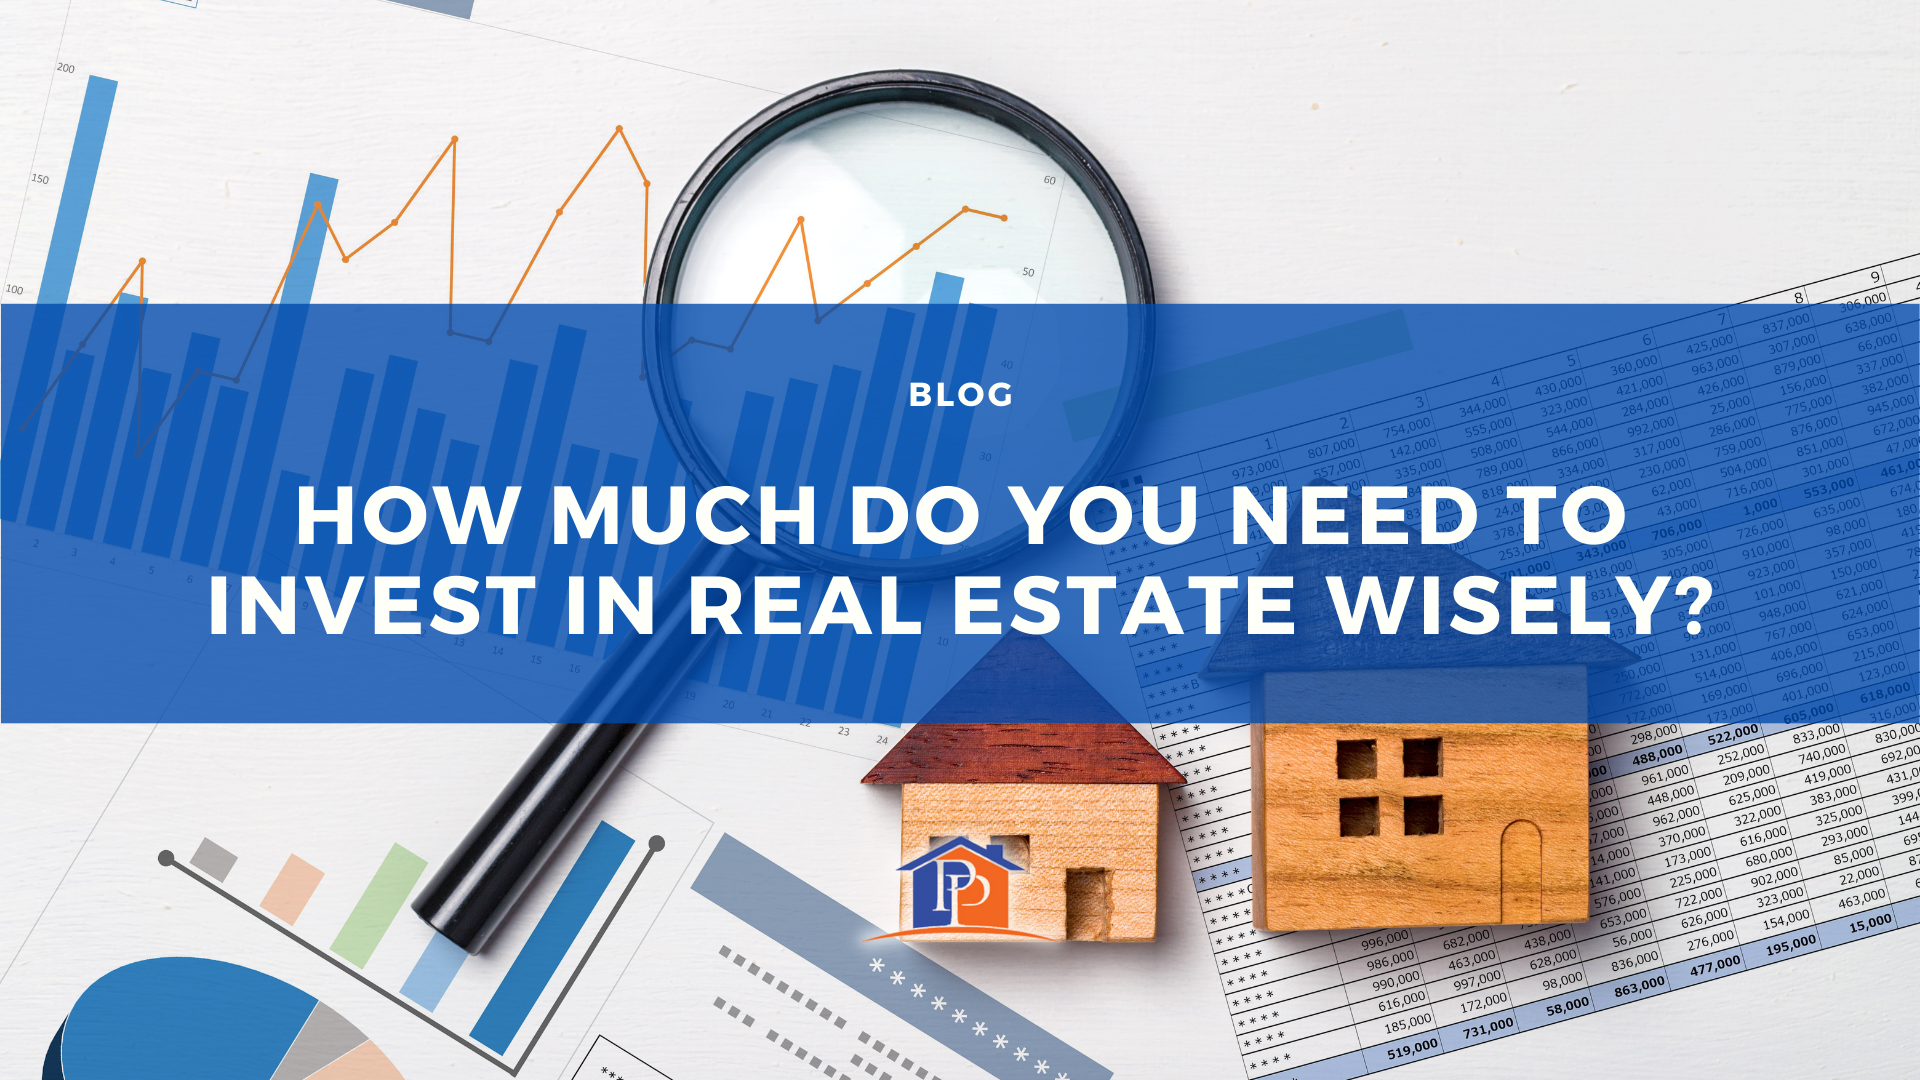 How Much Do You Need to Invest in Real Estate Wisely?